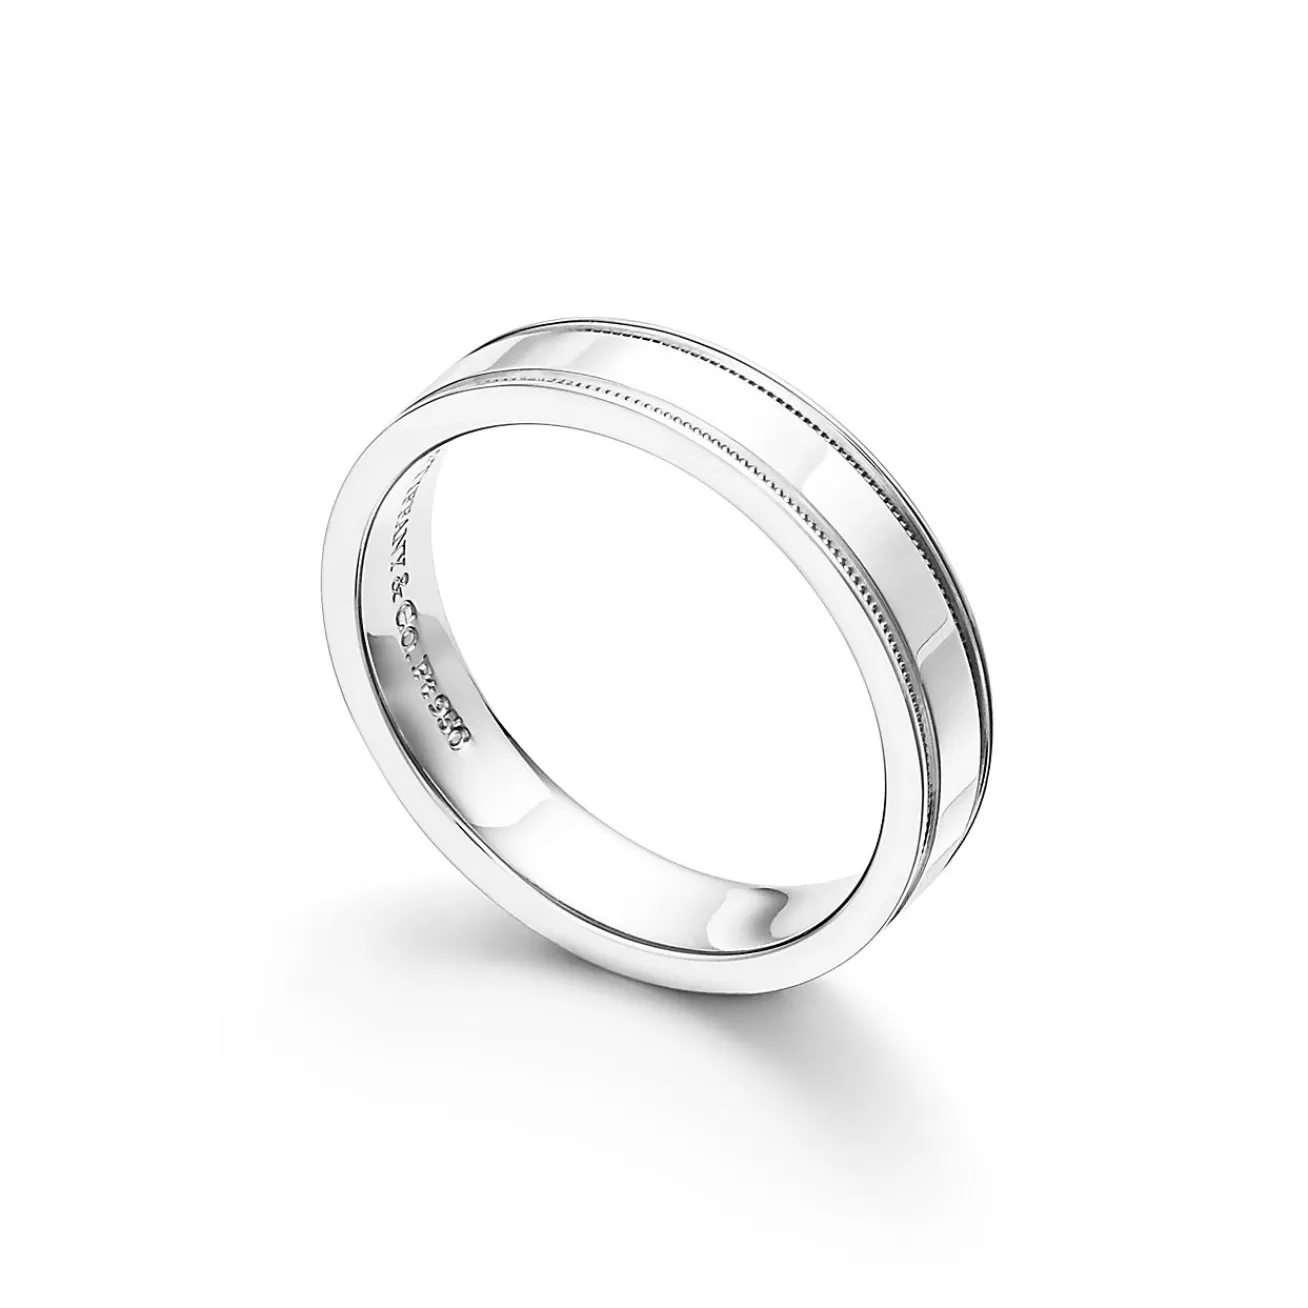 Tiffany & Co. Tiffany Together Double Milgrain Band Ring in Platinum, 4 mm Wide | ^Women Rings | Platinum Jewelry